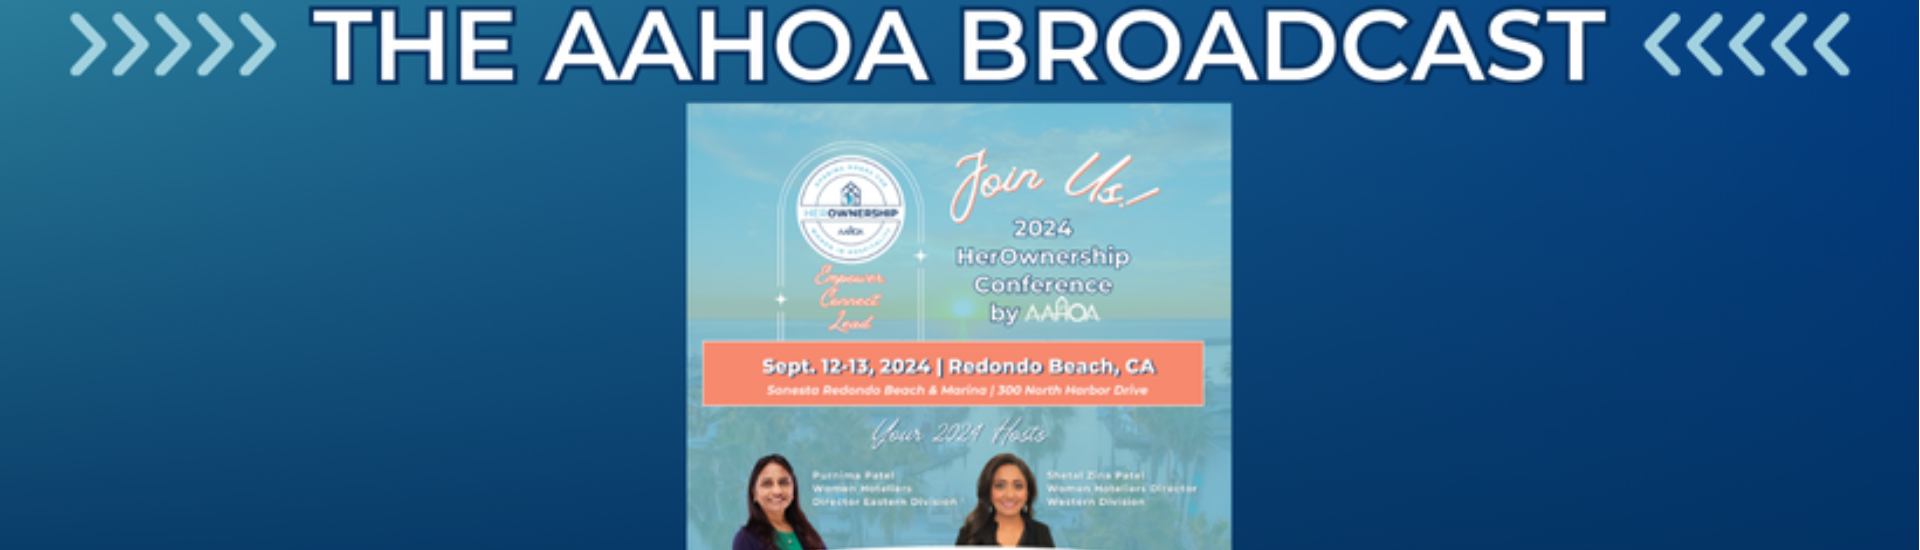 Registration Is Officially Open for the HerOwnership Conference by AAHOA!